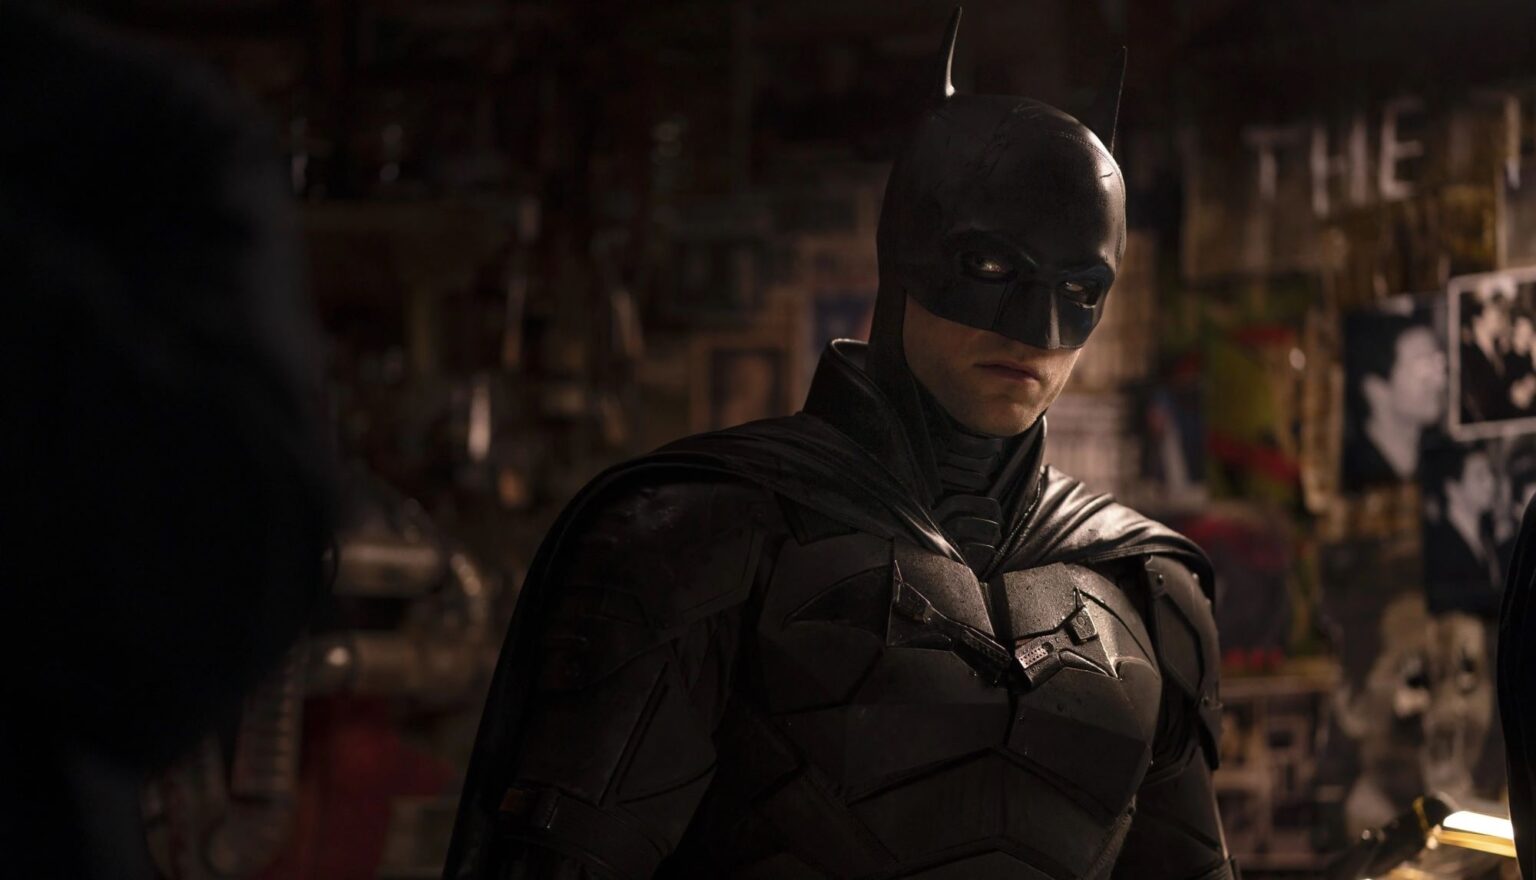 DC's 'The Batman', directed by Matt Reeves, could end up being the biggest superhero event of the year. Don't miss out, stream the film for free online.